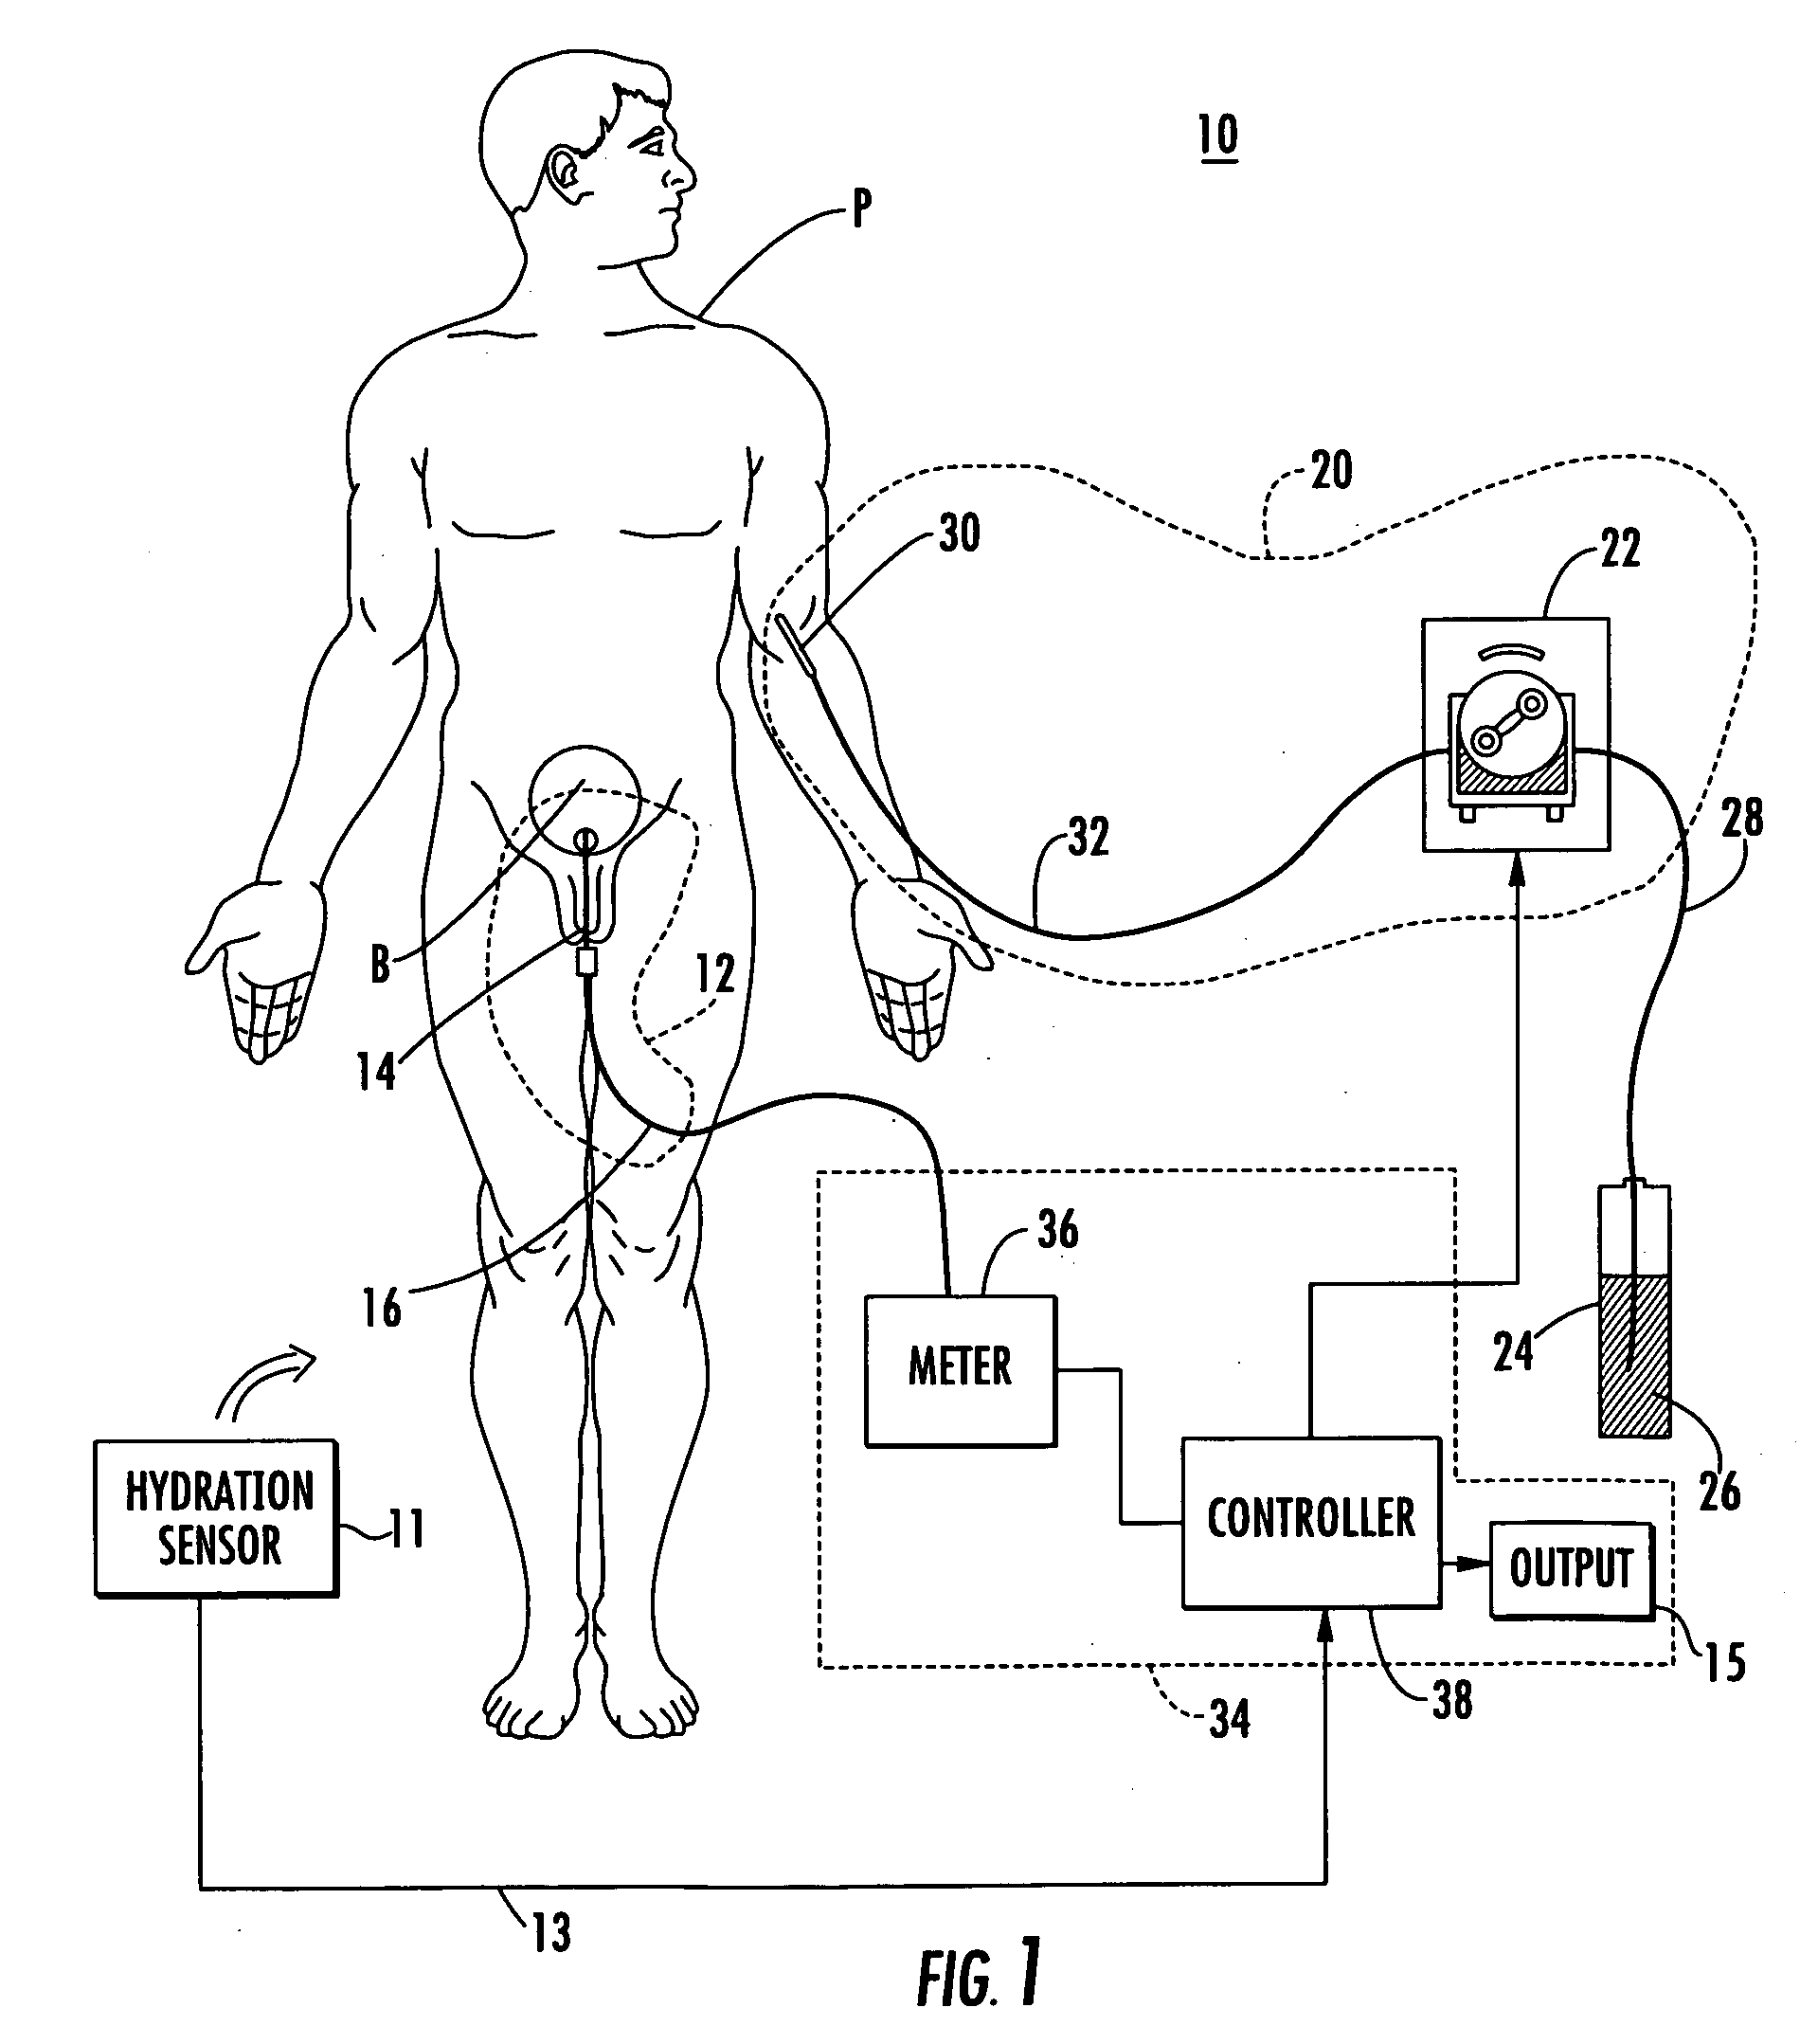 Patient hydration system with hydration state detection